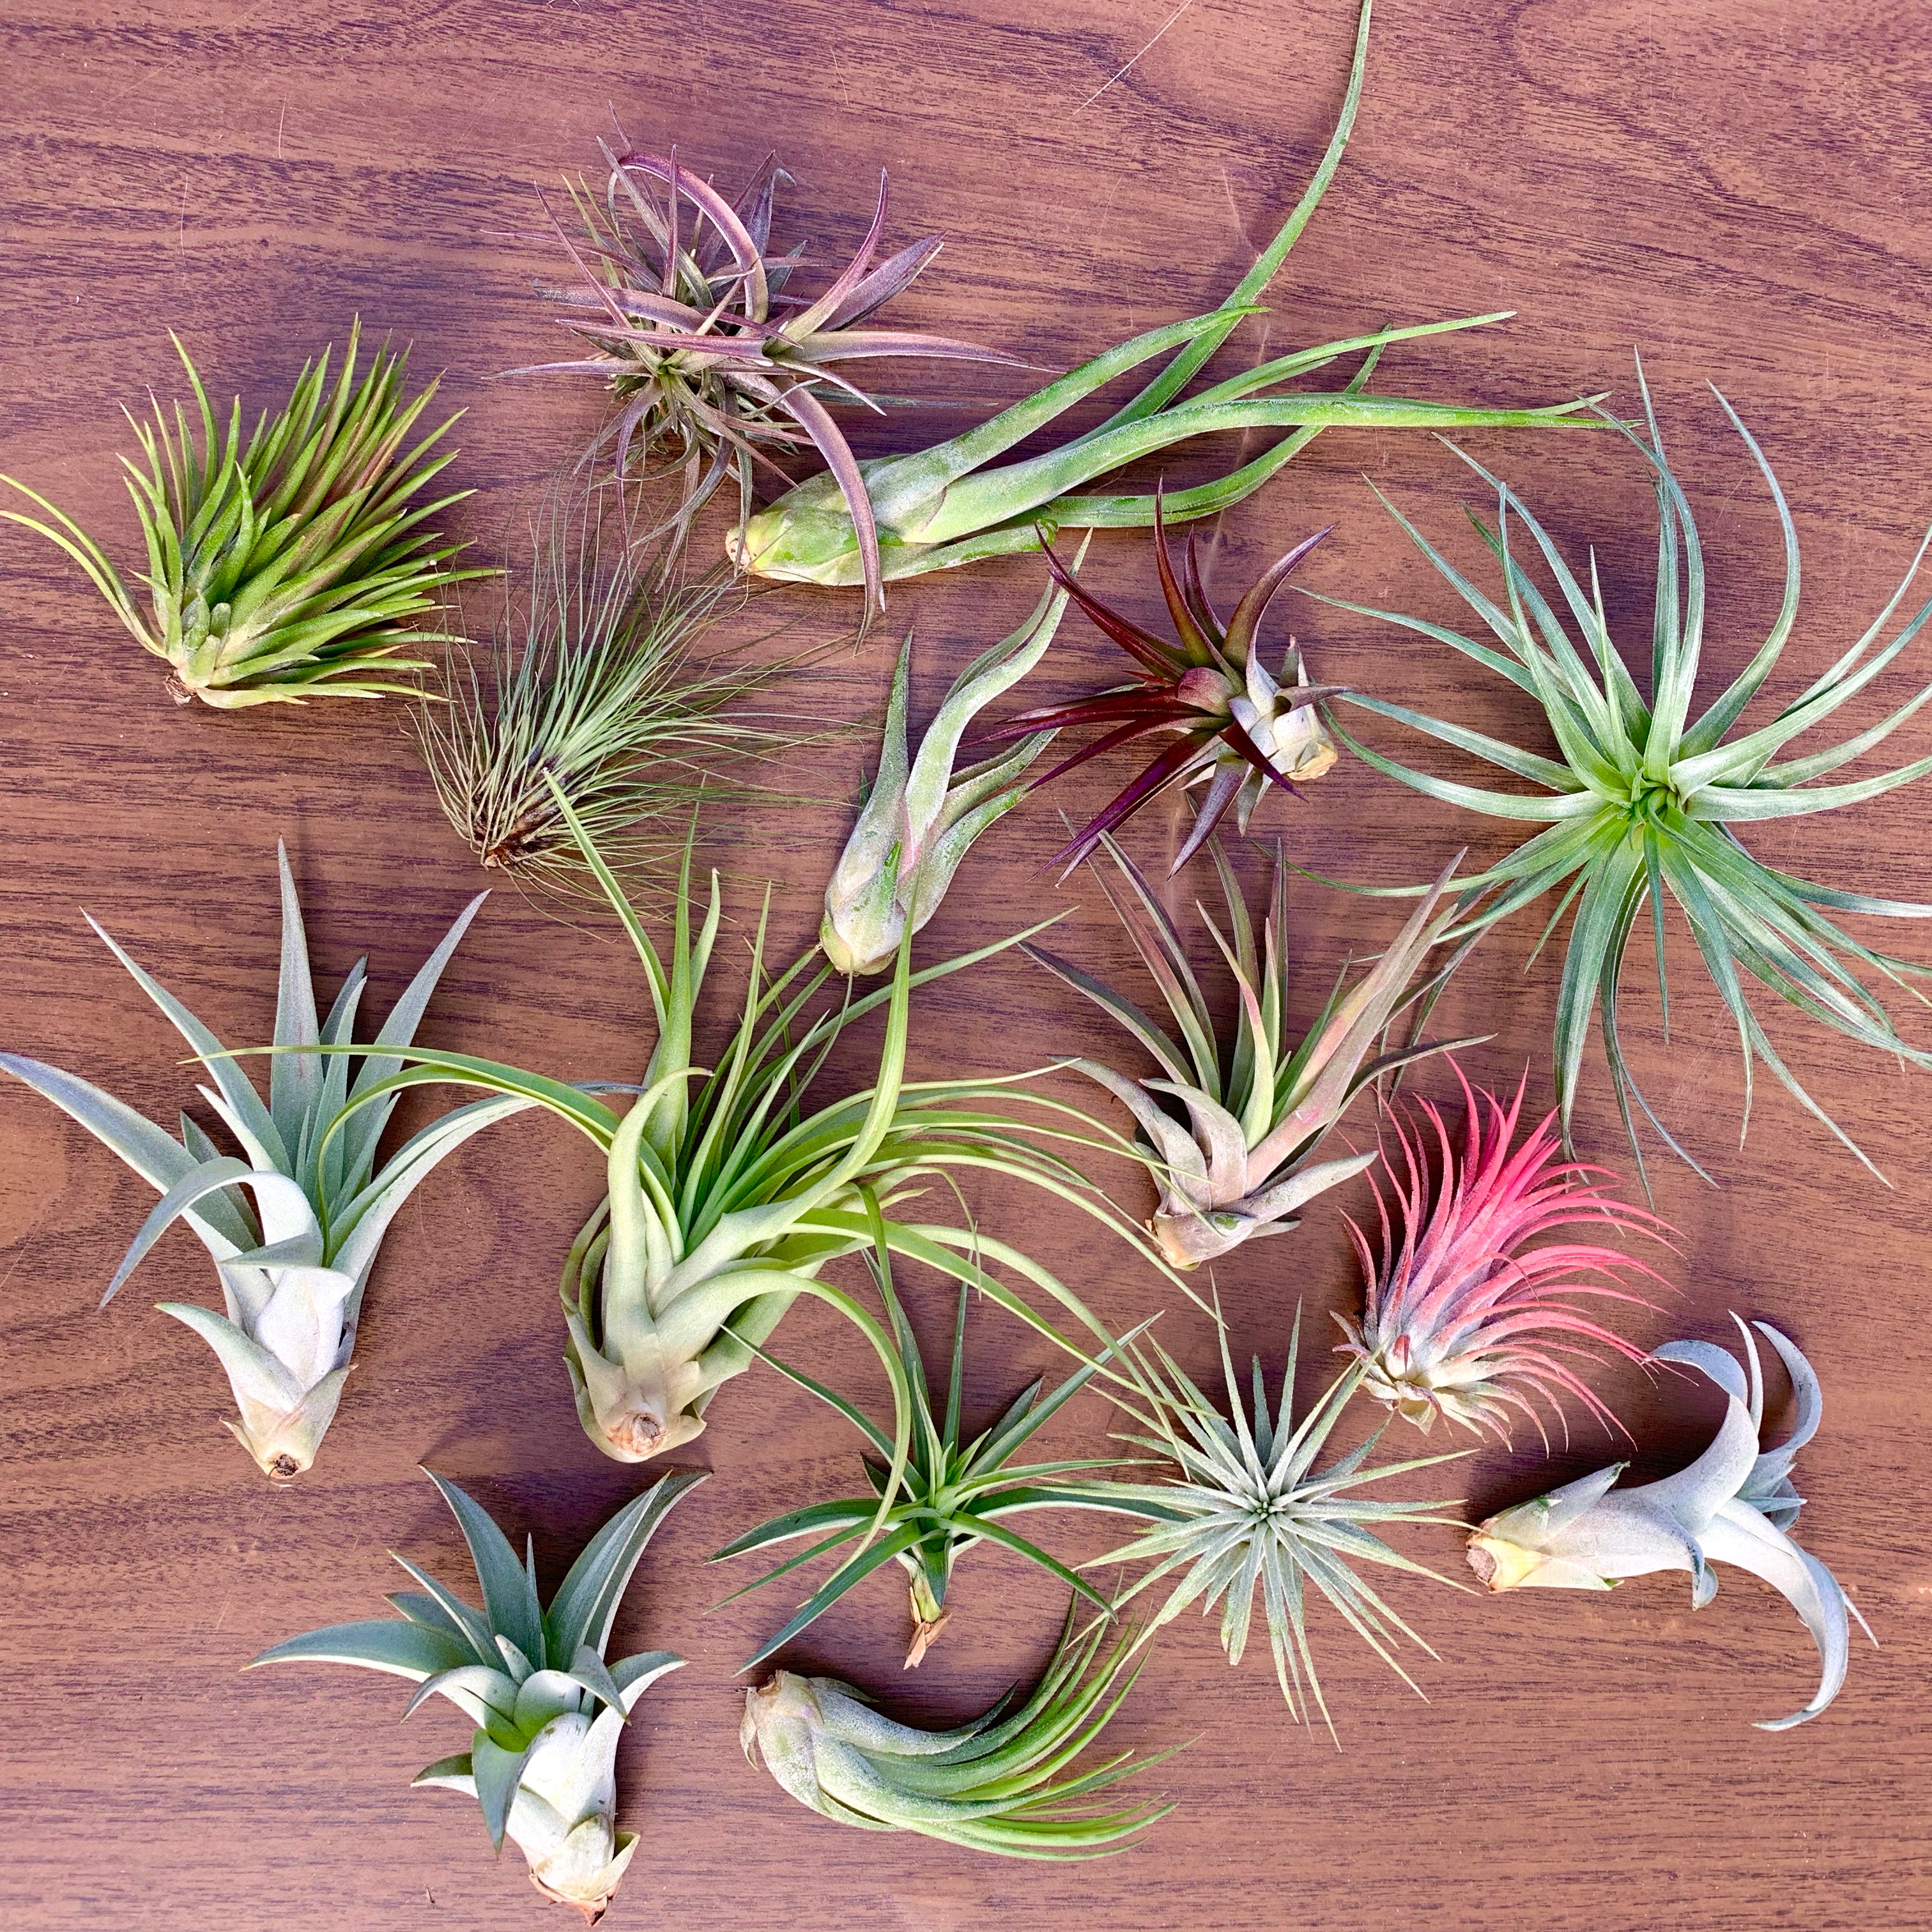 Beautiful colorful air plant tillandsia mix for sale displayed in a box